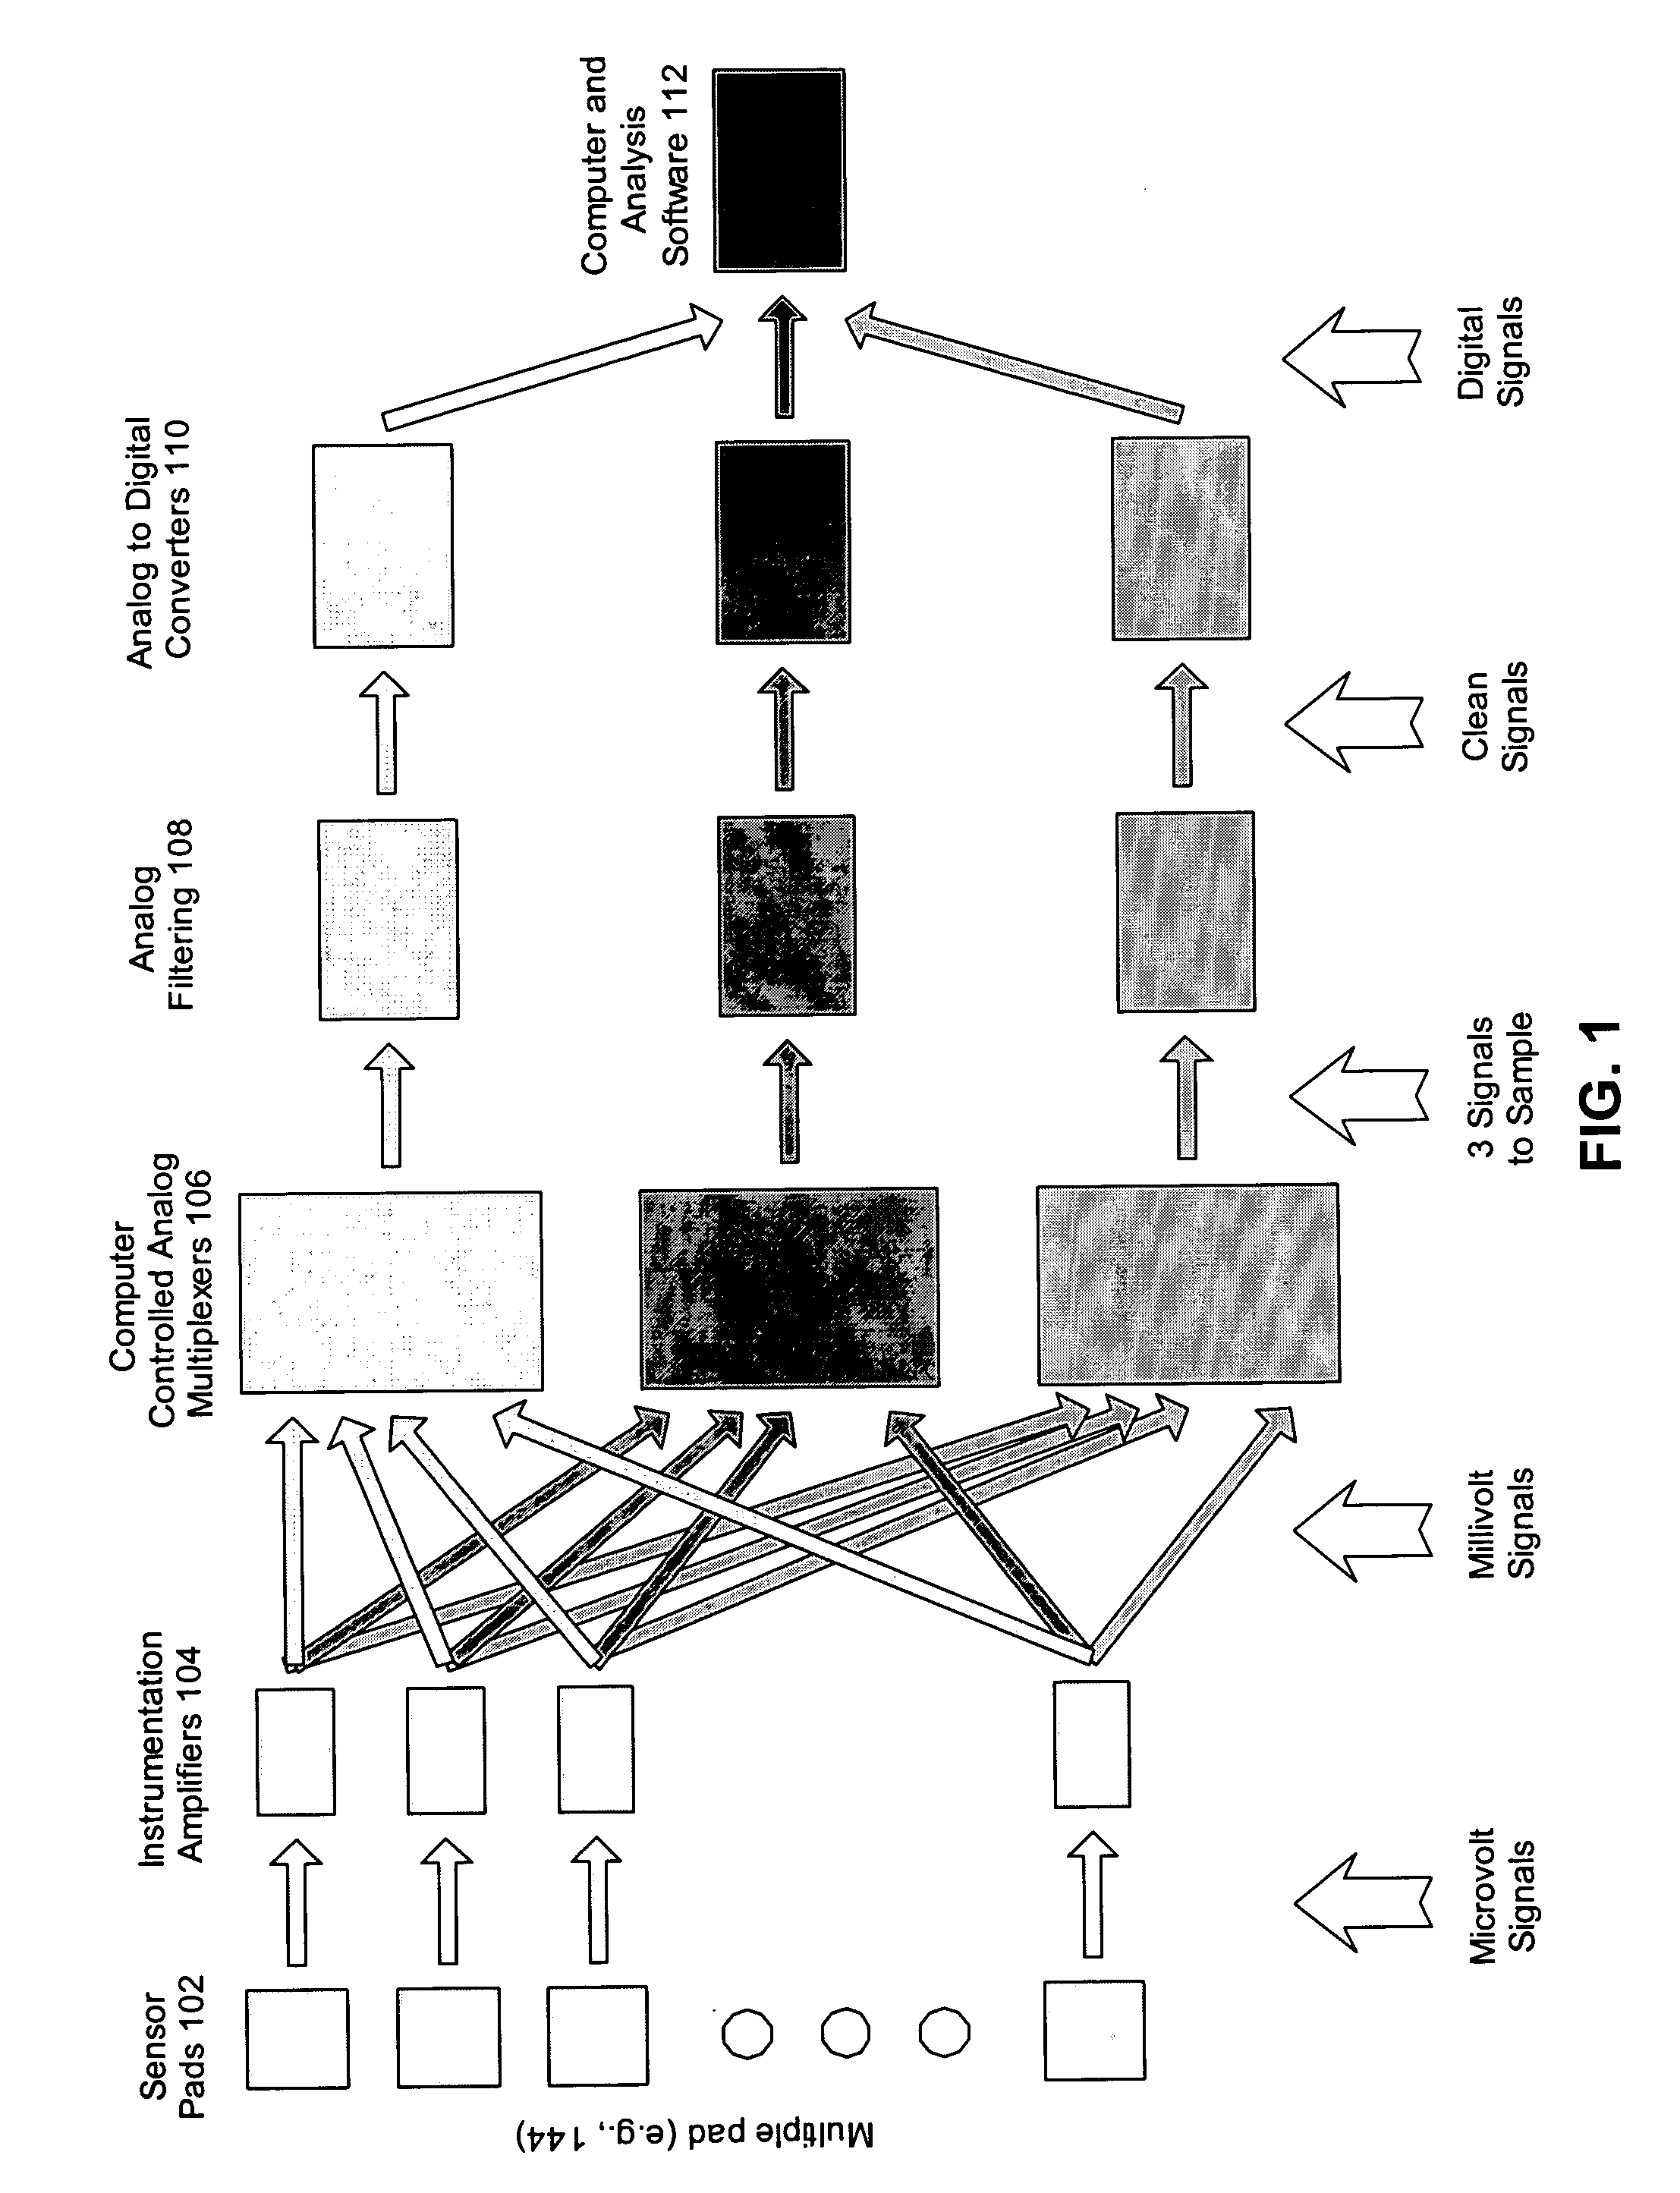 System and method for detecting and analyzing electrocardiological signals of a laboratory animal